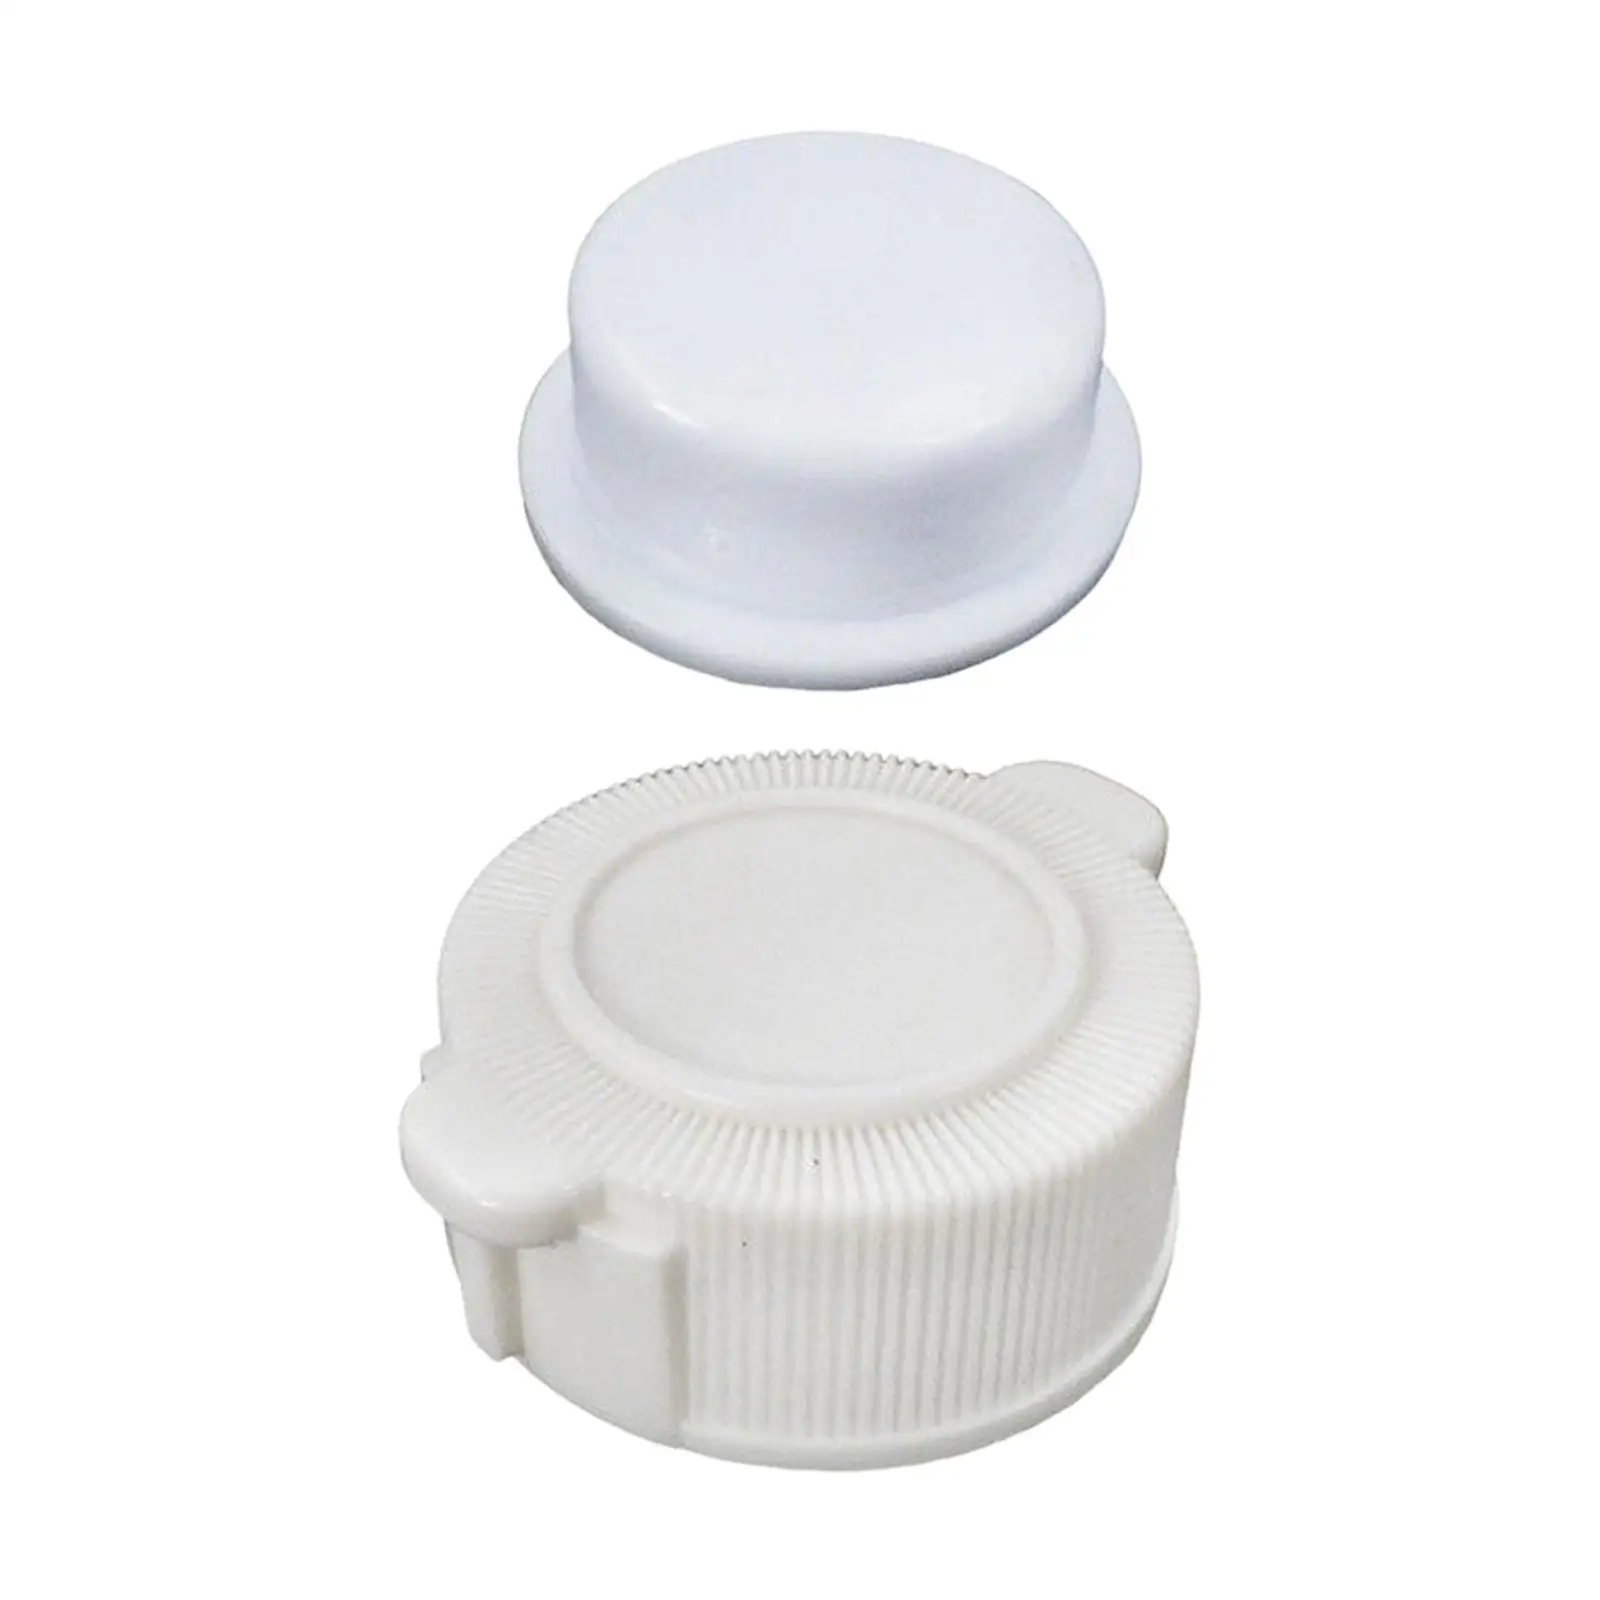 

Pools Valve Cap and Plug Assembly Drainage Plug Accessories Pool Replacement Part Drain Plug Cap for Airbed Pools Air Mattress